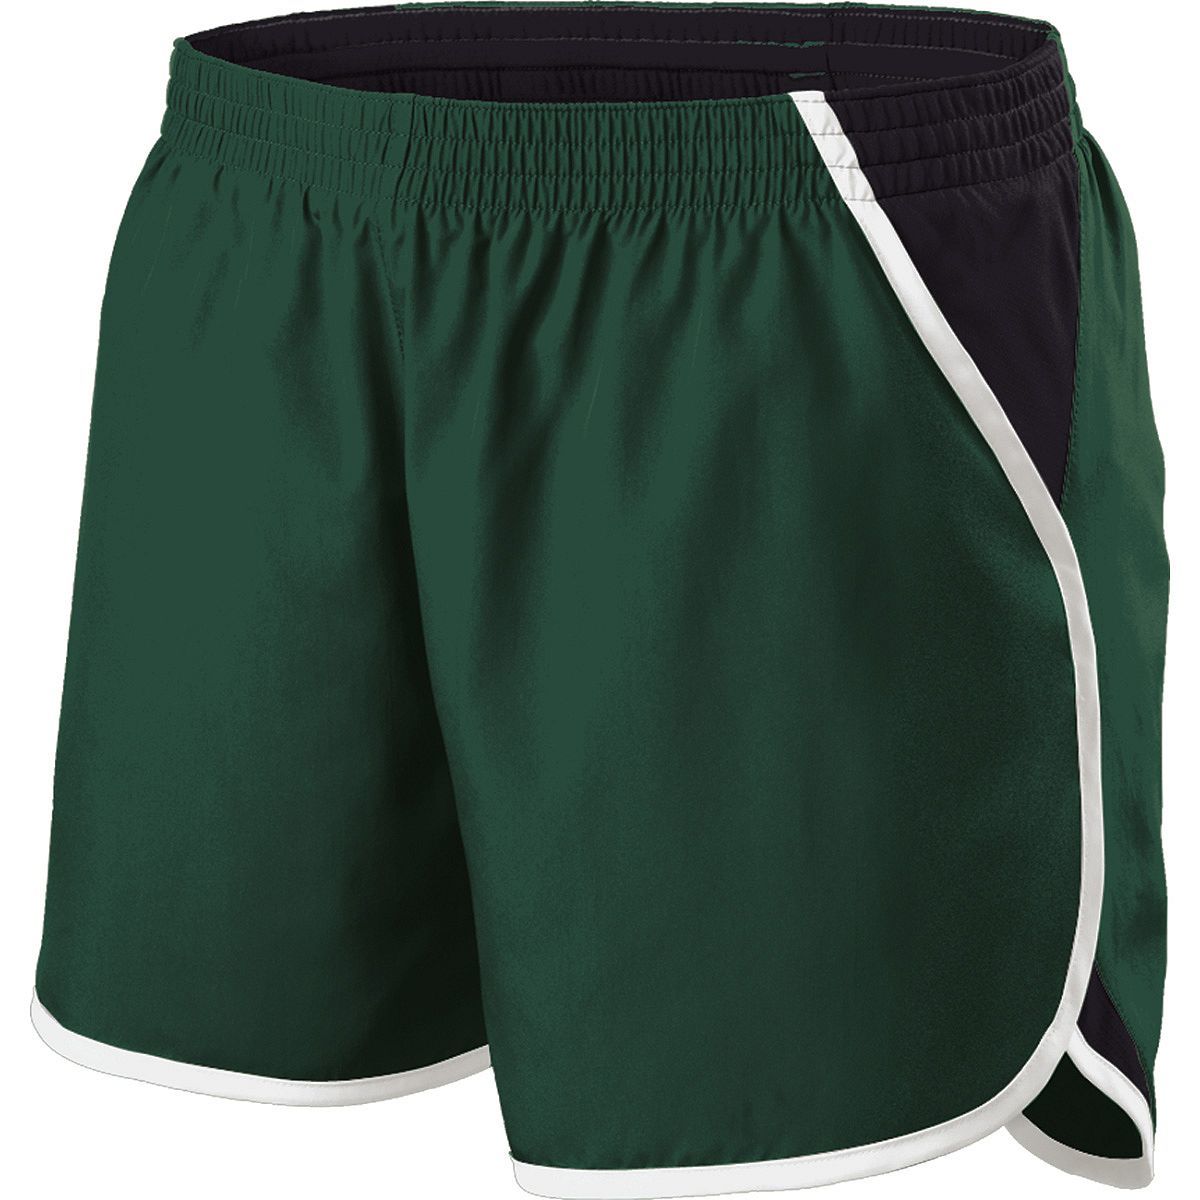 Holloway Girls Energize Shorts in Forest/Black/White  -Part of the Girls, Holloway, Girls-Shorts product lines at KanaleyCreations.com